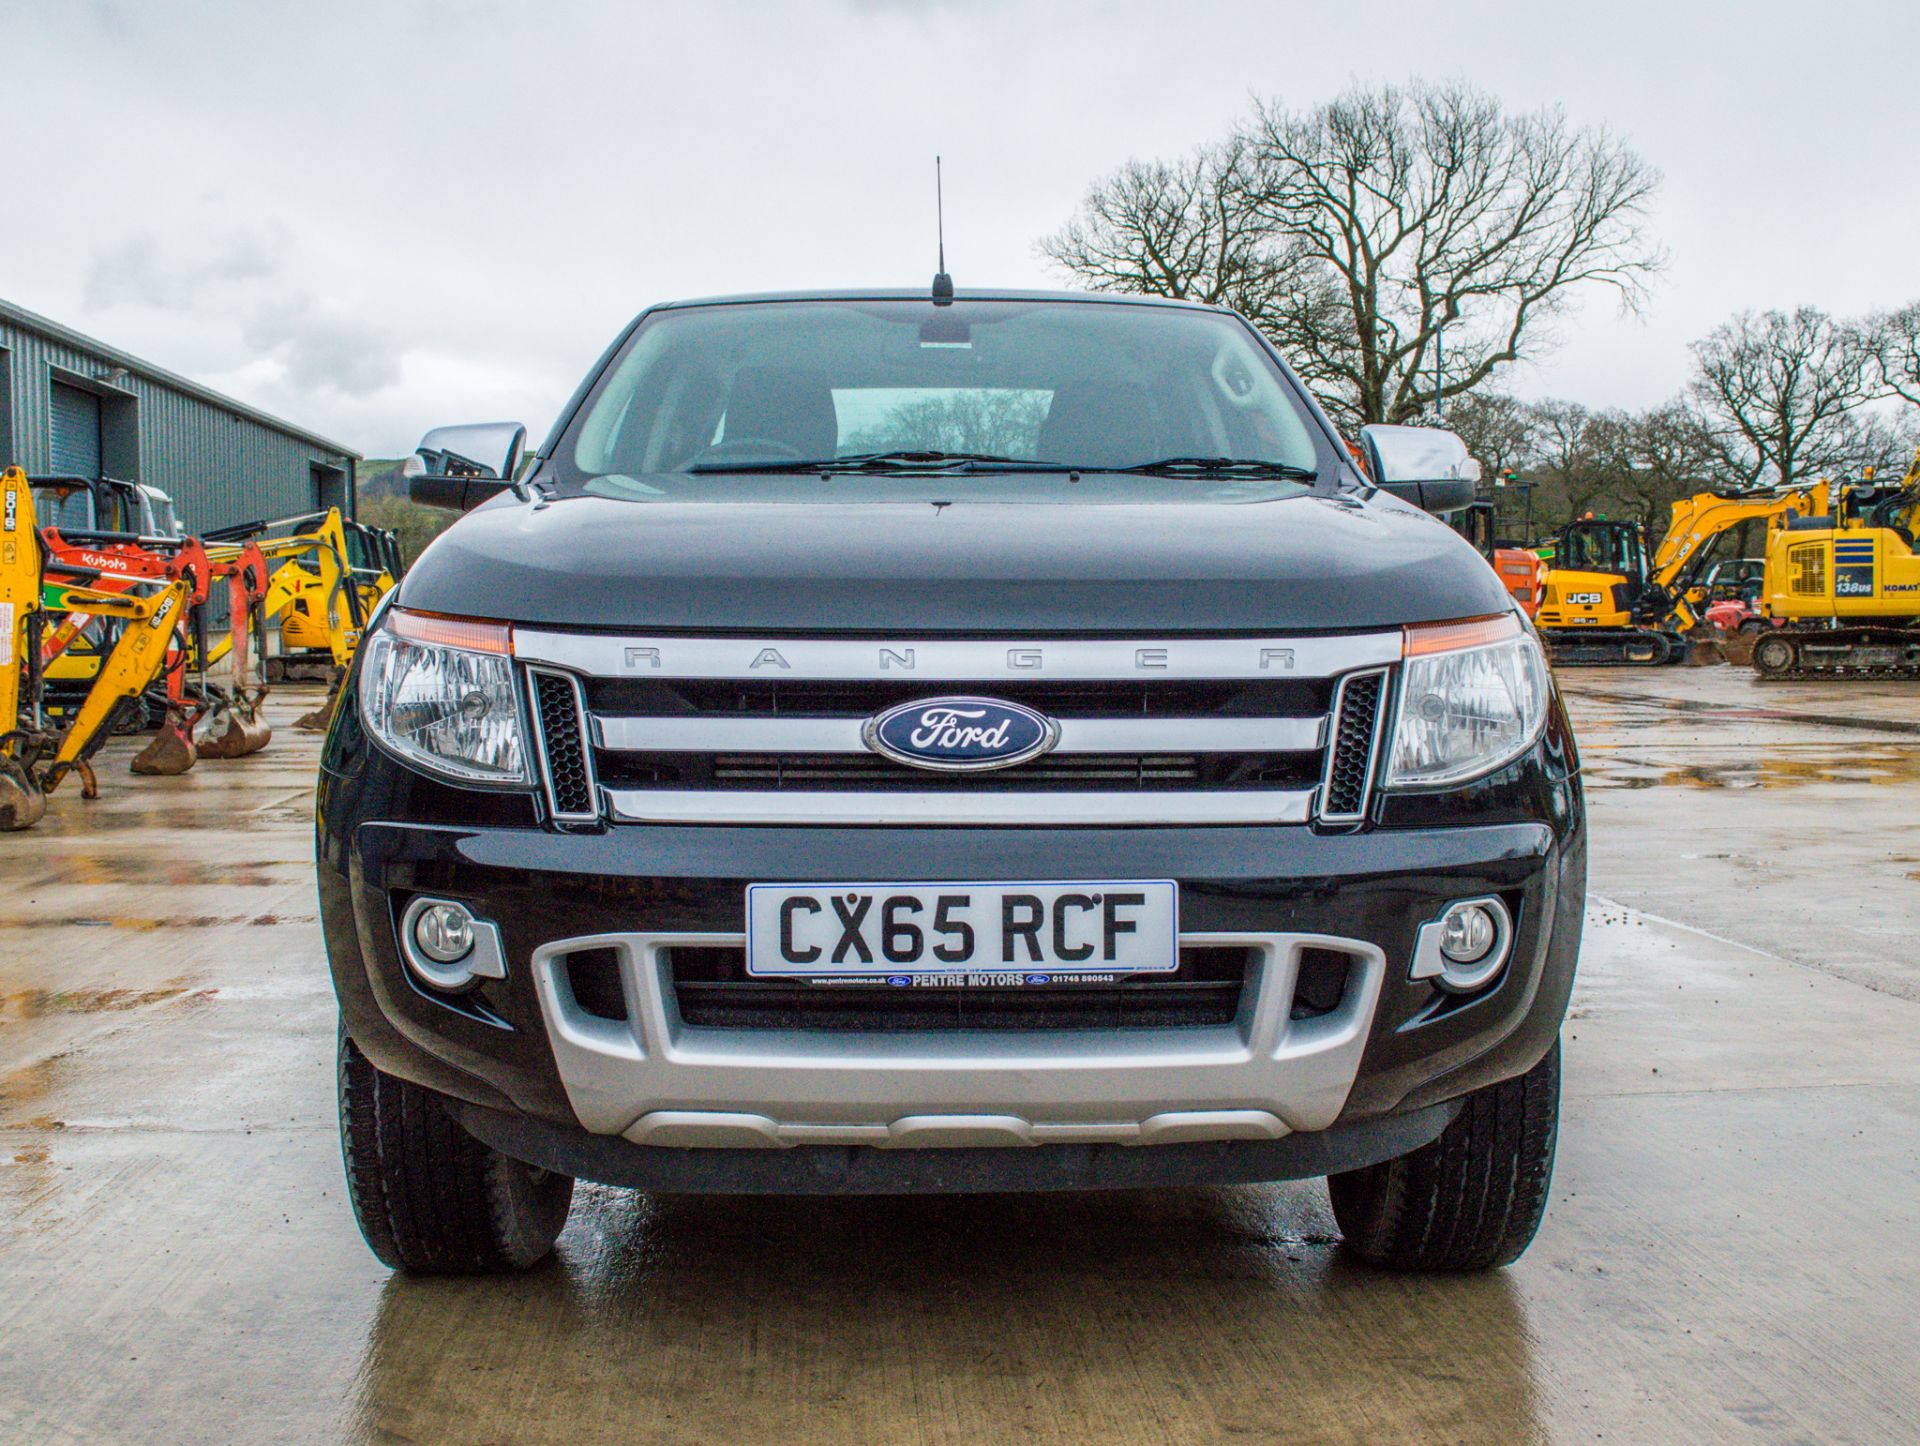 Ford Ranger 2.2 TDCI 150 Limited 4wd automatic double cab pick up - Image 5 of 28